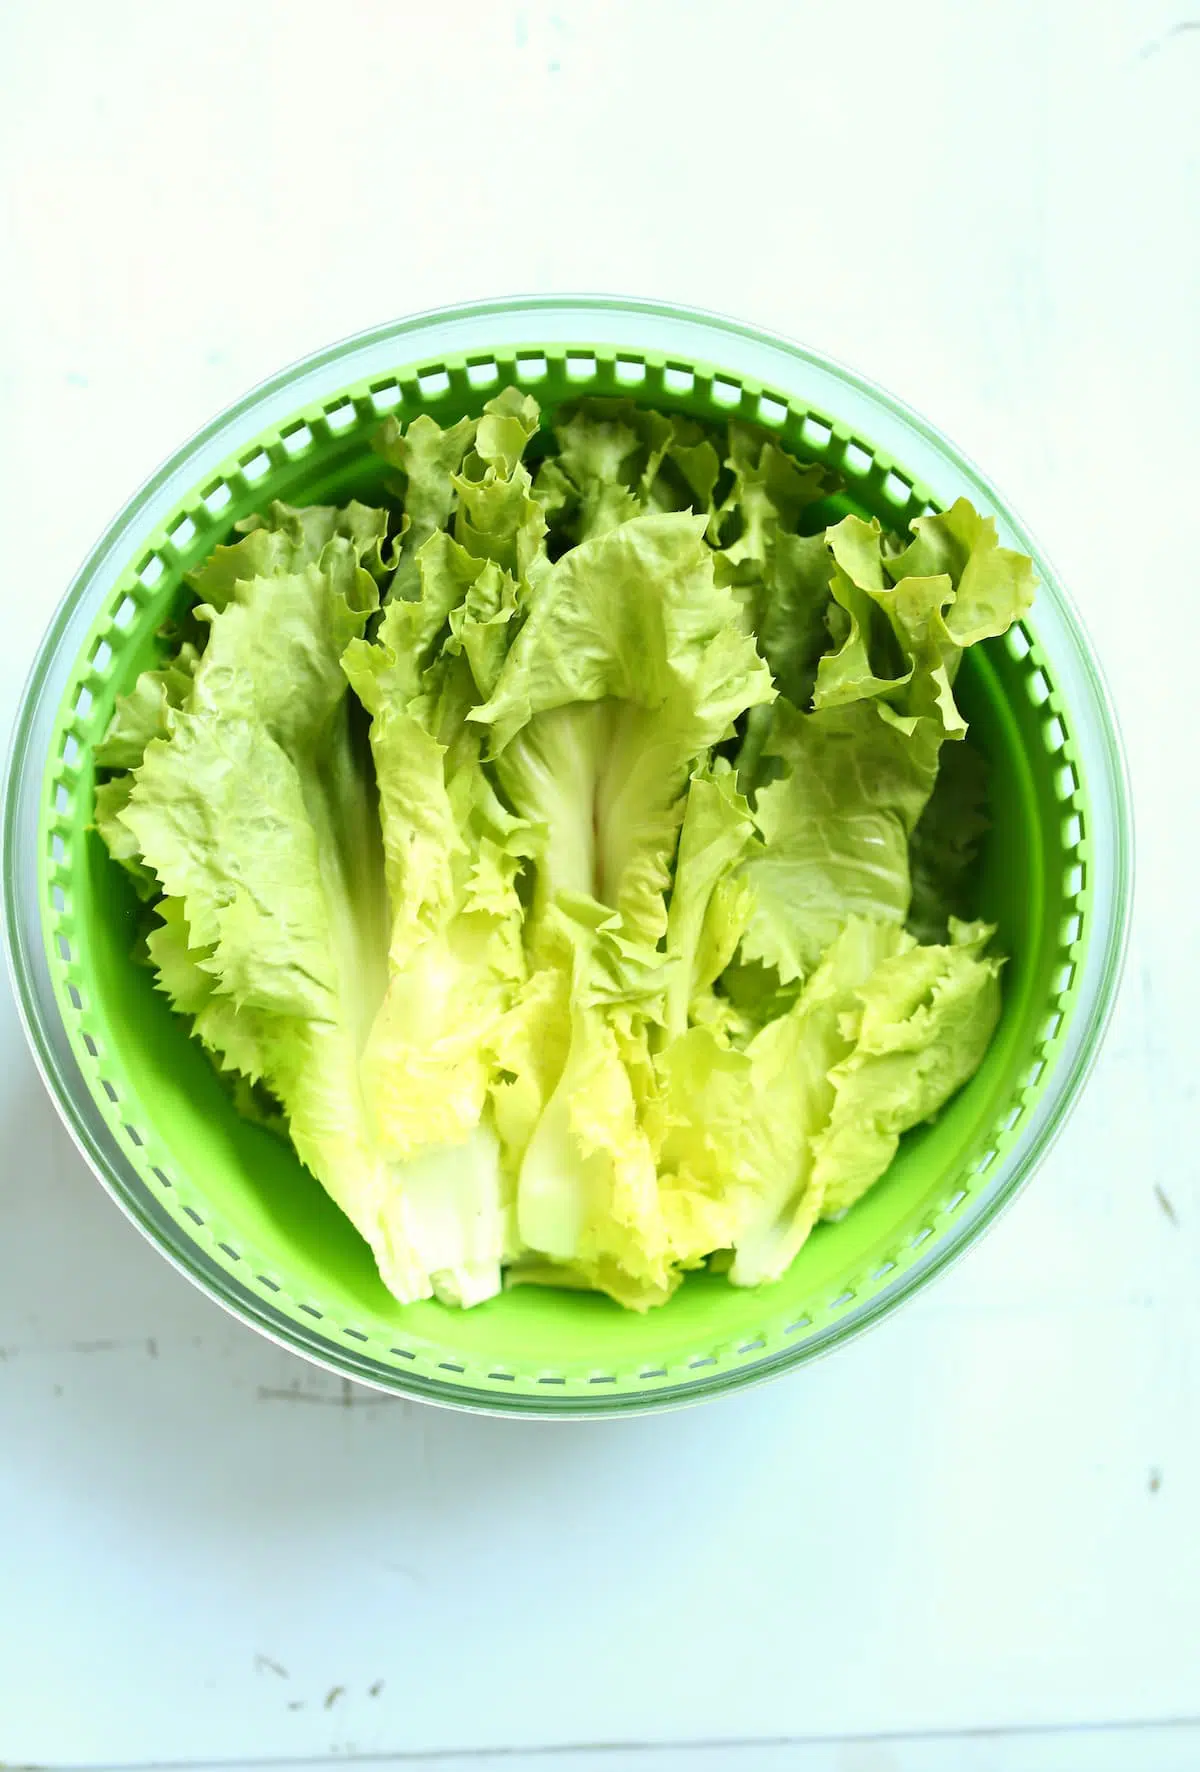 a head of escarole in a salad spinner.